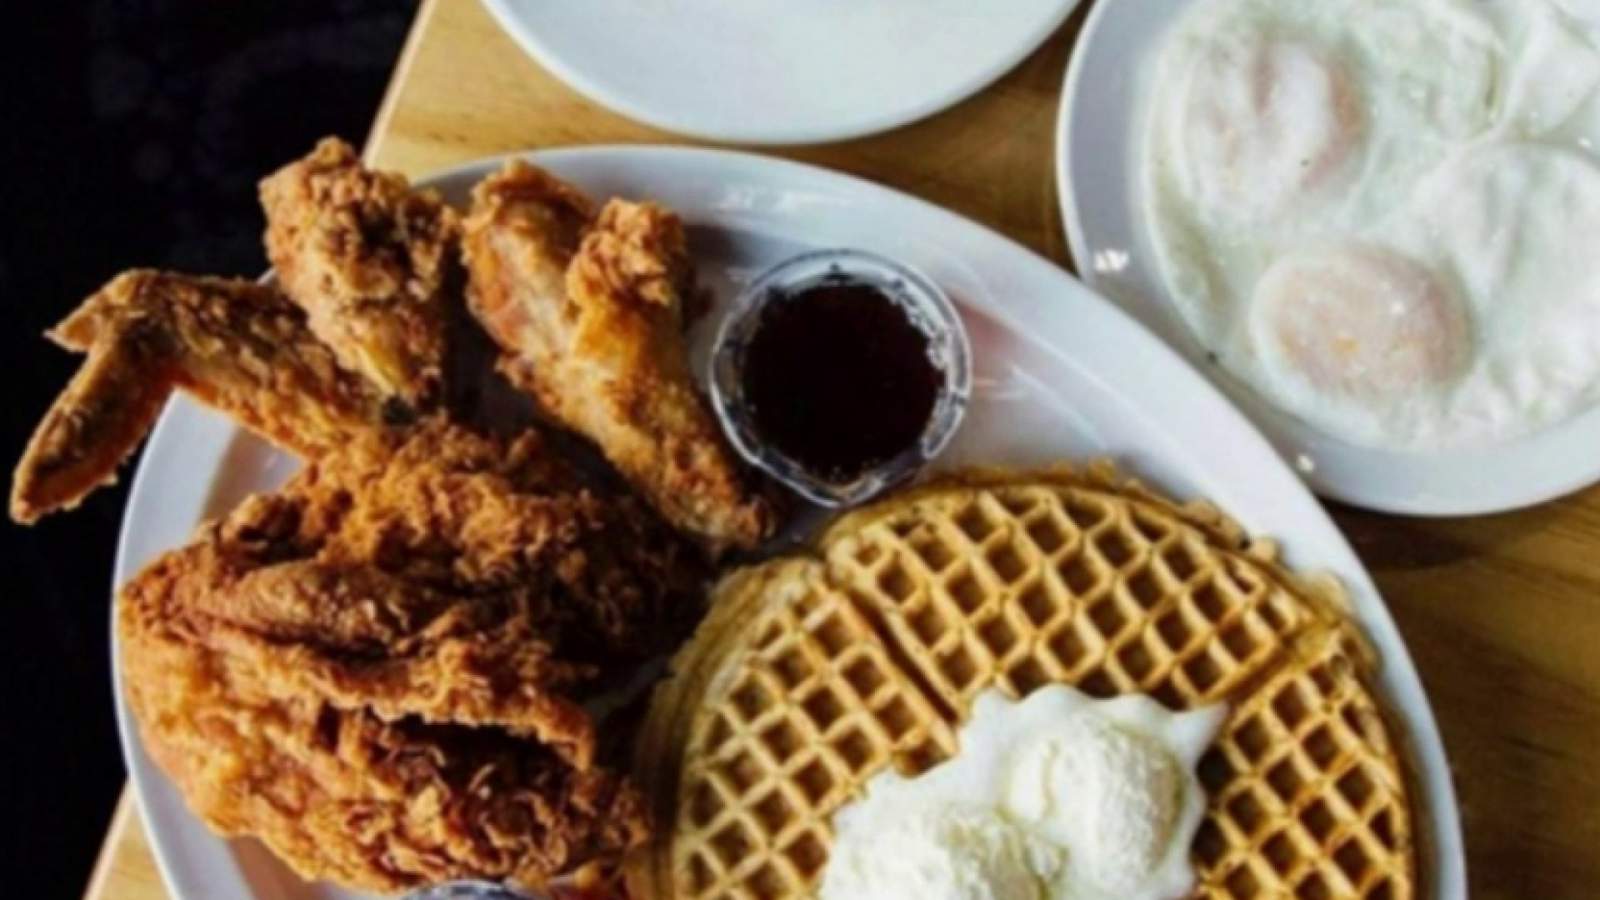 This new app wants to connect you to local black-owned restaurants